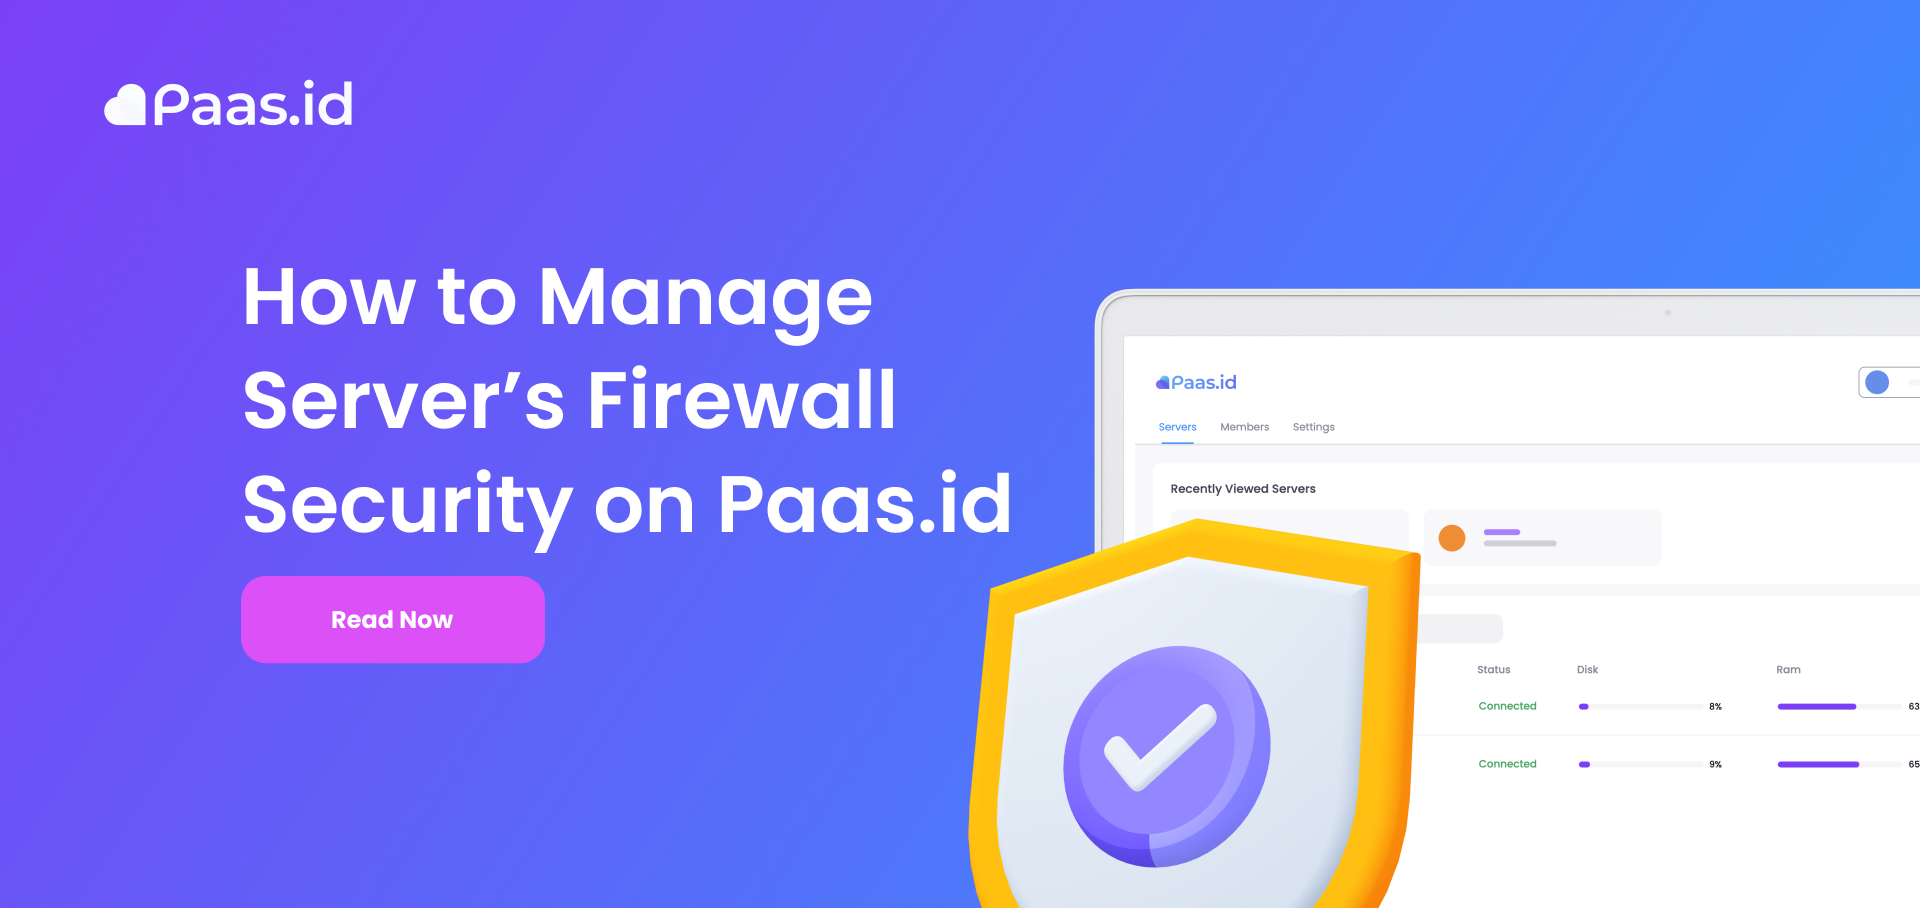 How to Manage Server's Firewall Security on Paas.id